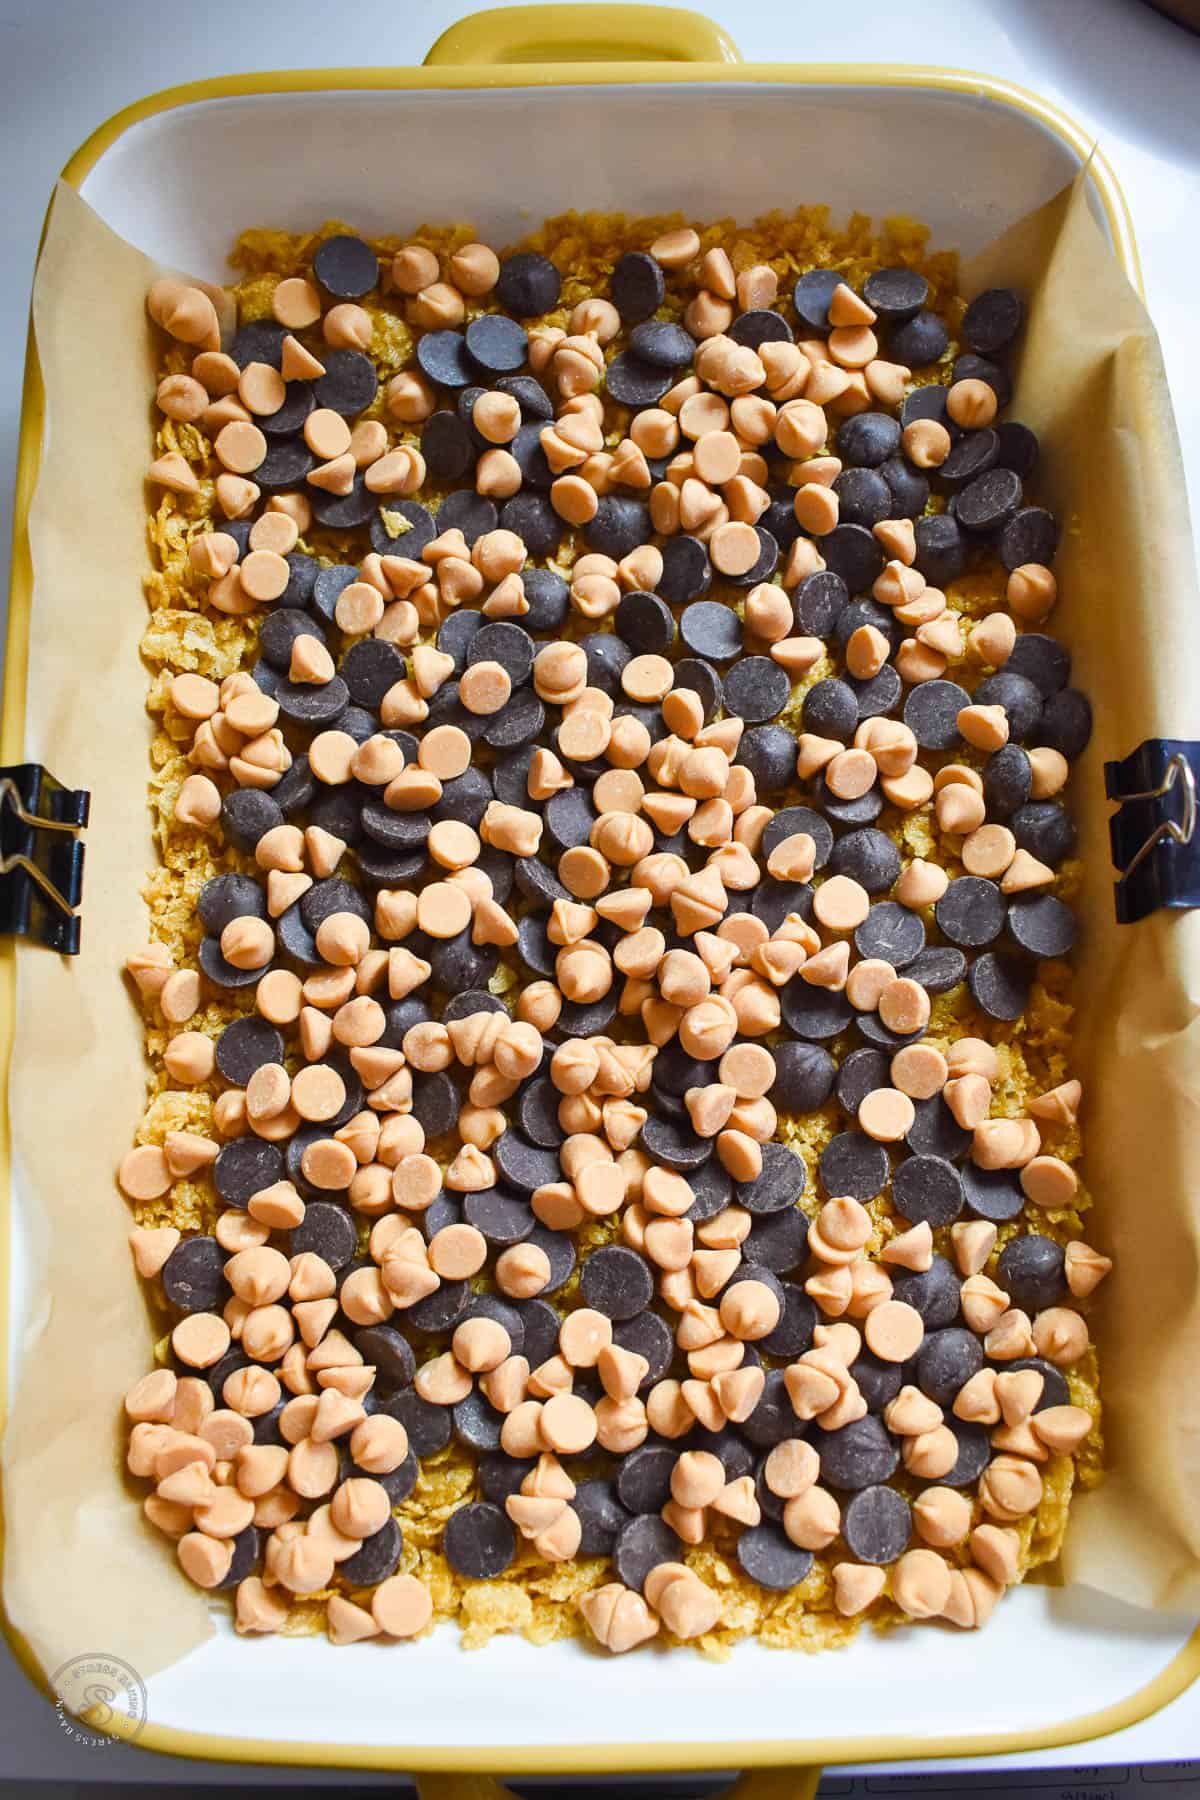 Chocolate chips and butterscotch chips scattered on top of rushed cornflake cereal pressed into a baking dish